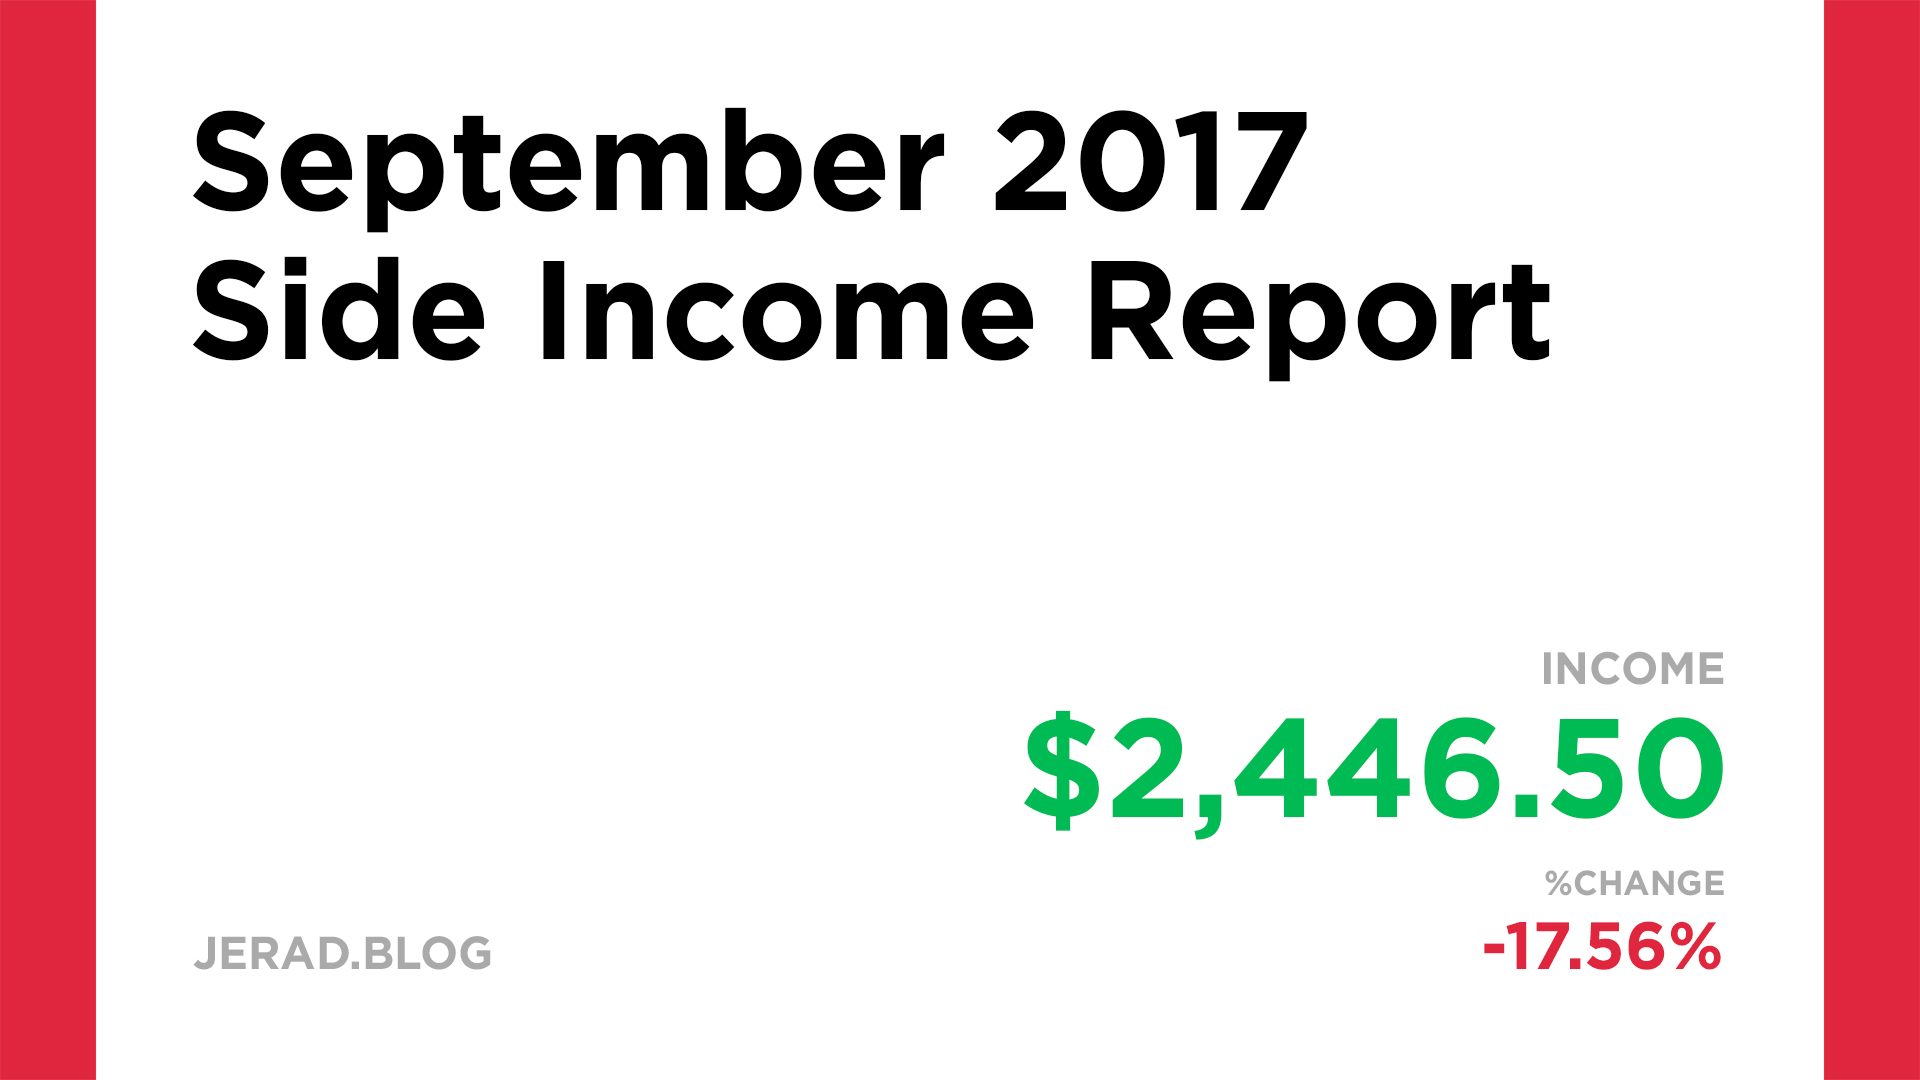 September 2017 Side Income Report